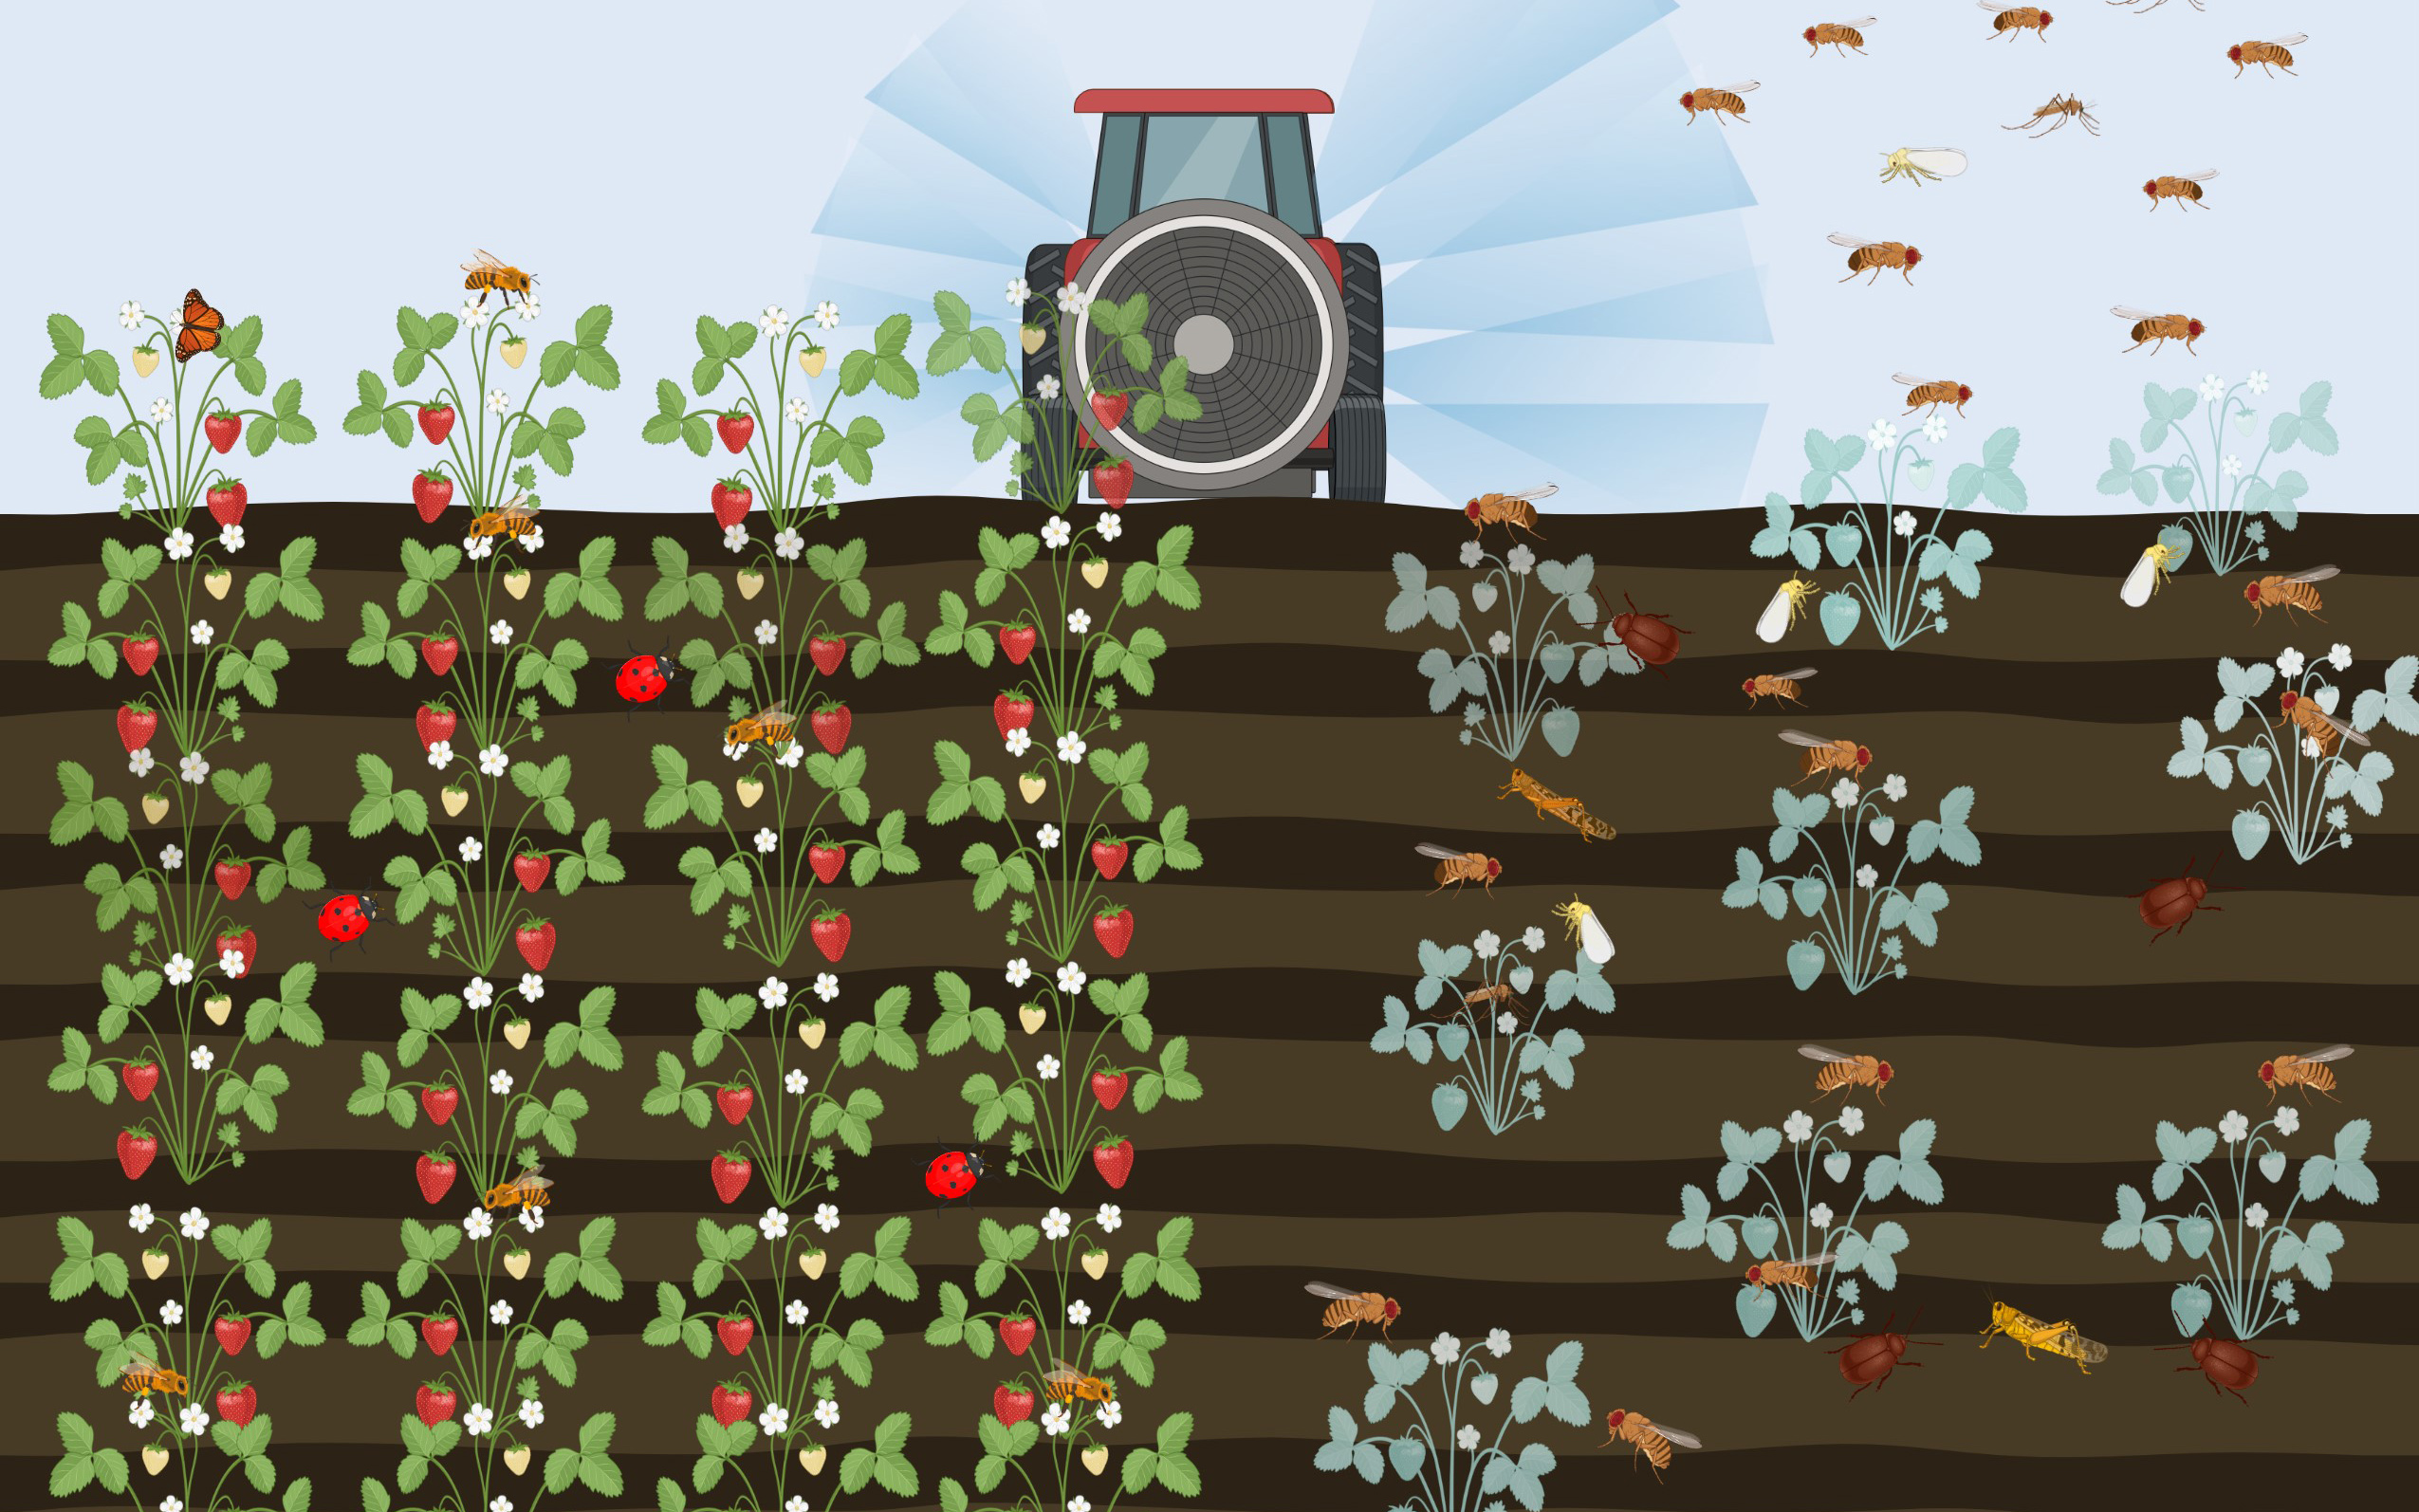 What causes insecticide resistance?